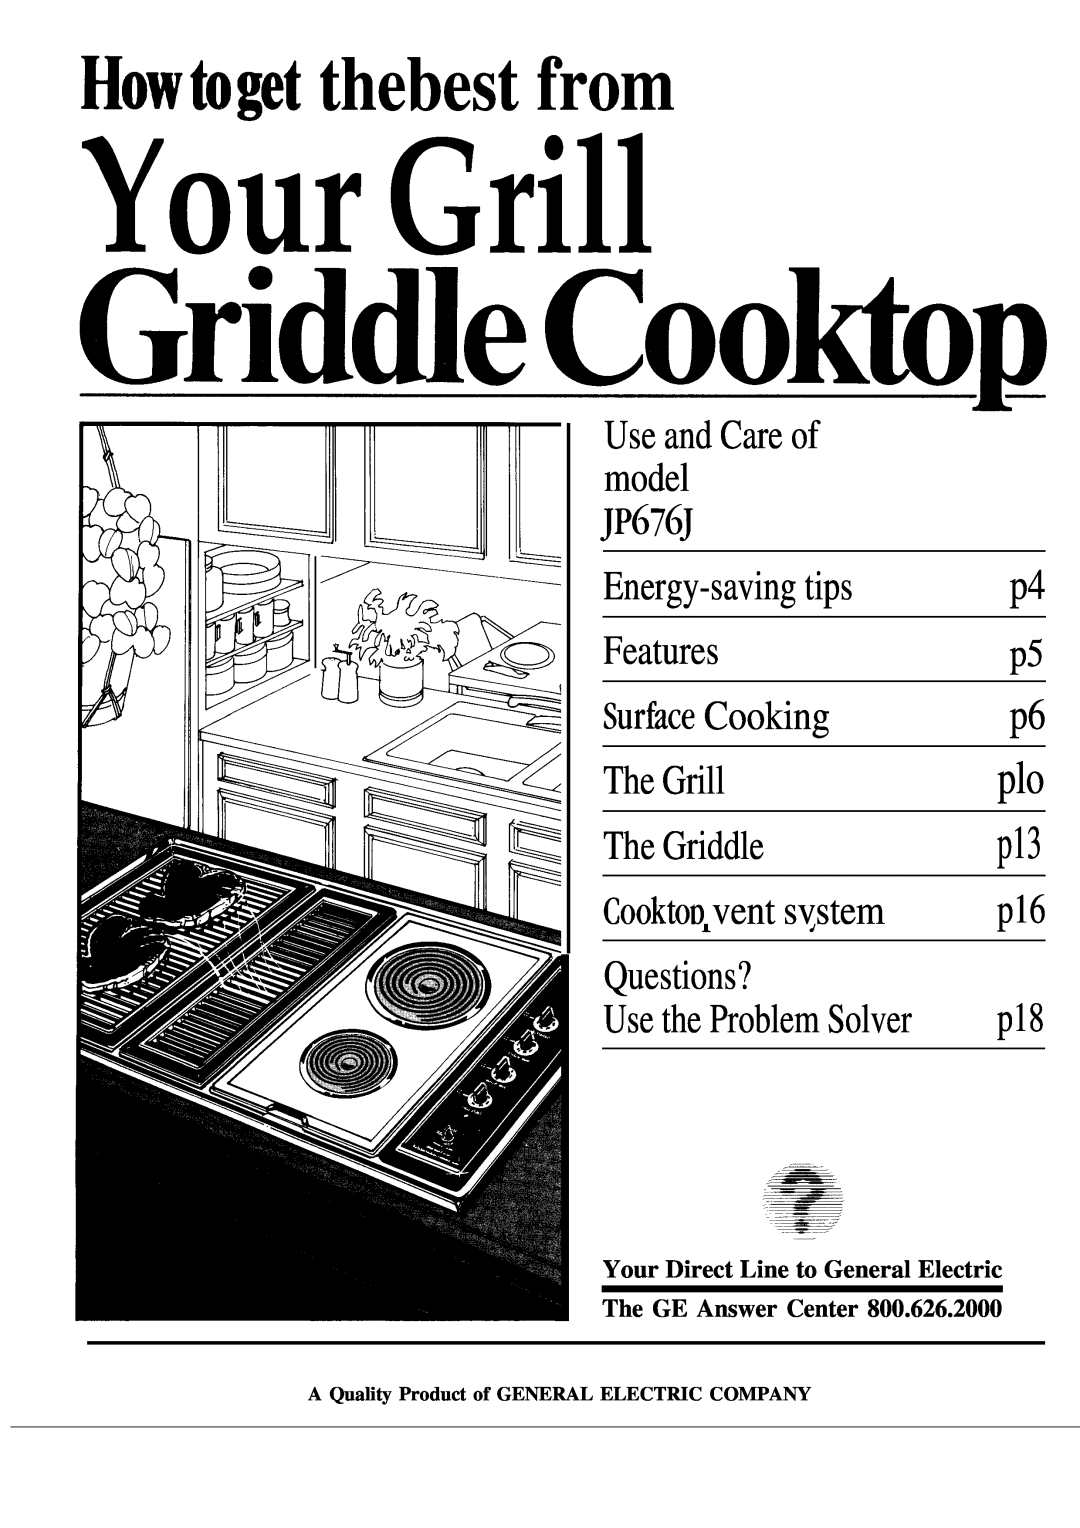 GE JP676J manual Your Direct Line to General Electric The GE Answer Center, Your Grill, GriddleCooktiq, Energy-saving tips 